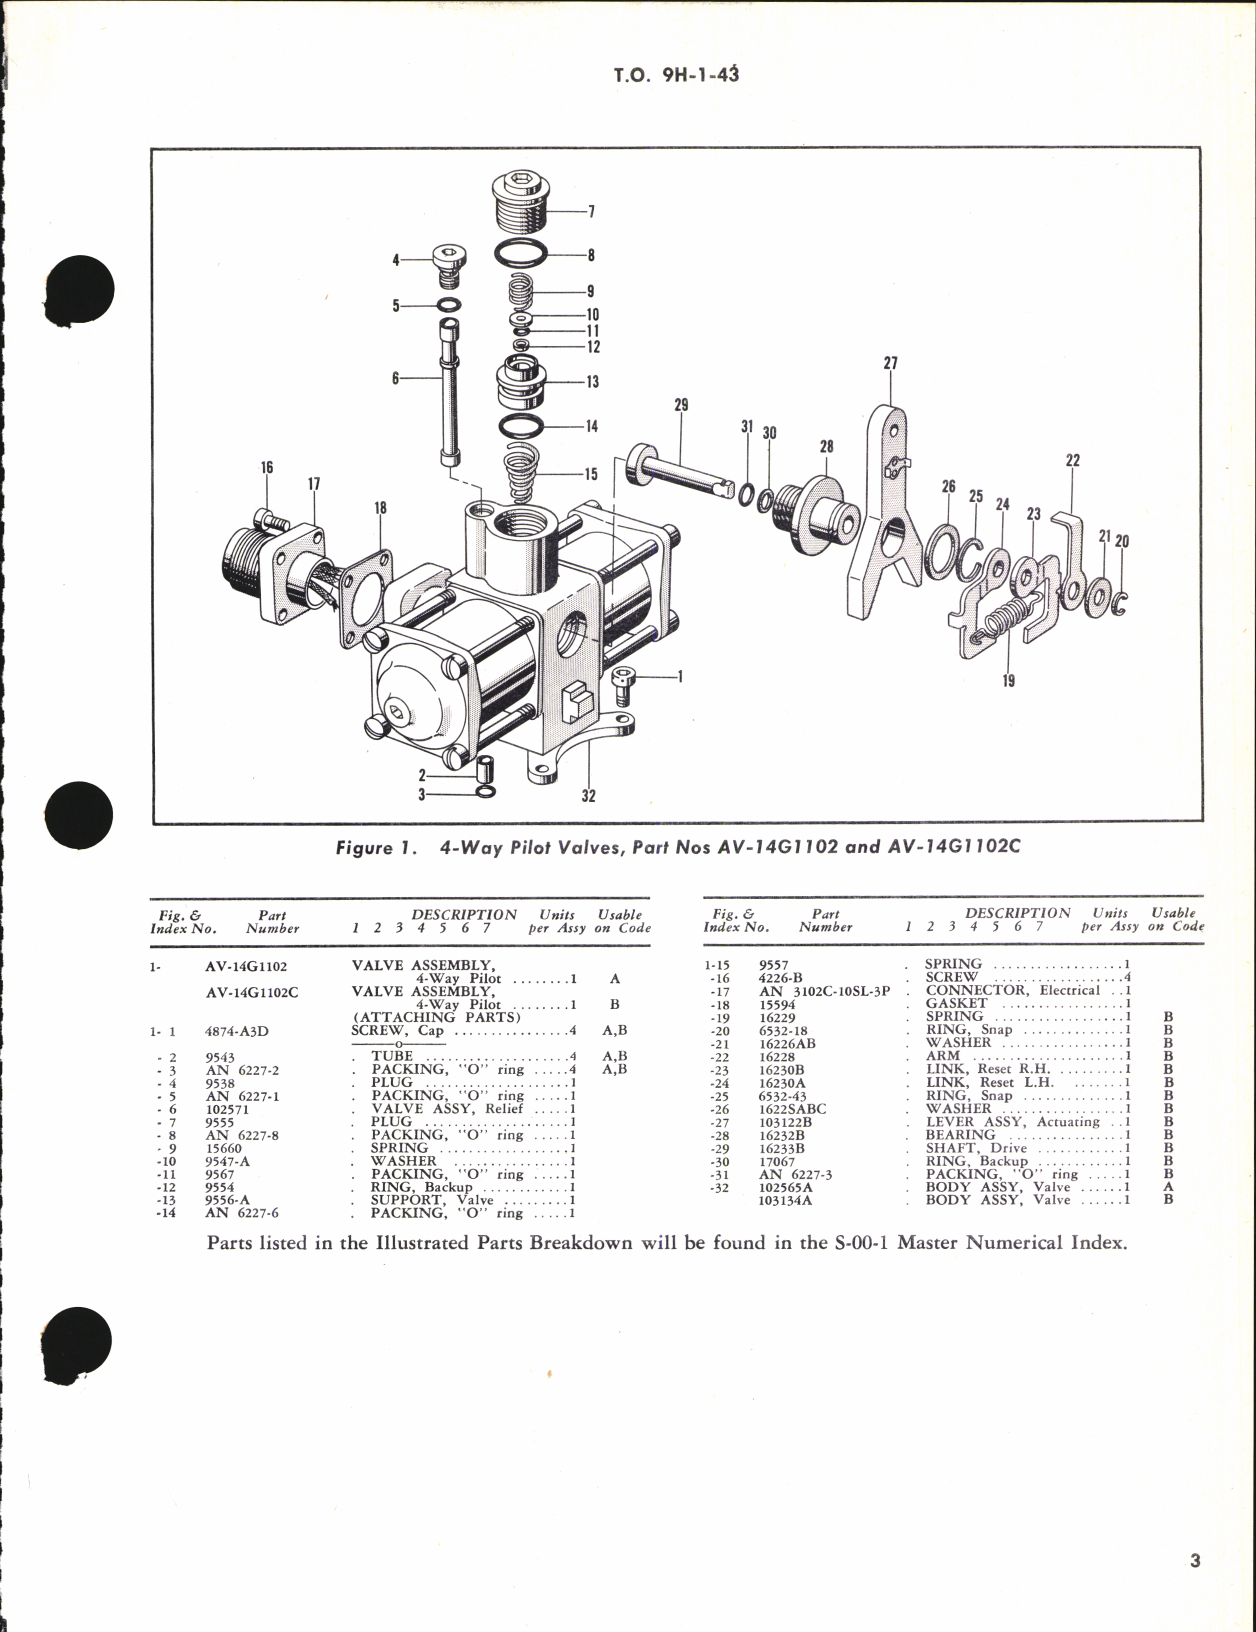 Sample page 3 from AirCorps Library document: Overhaul Instructions with Parts Breakdown for 4-Way. 3-Position Pilot Valve